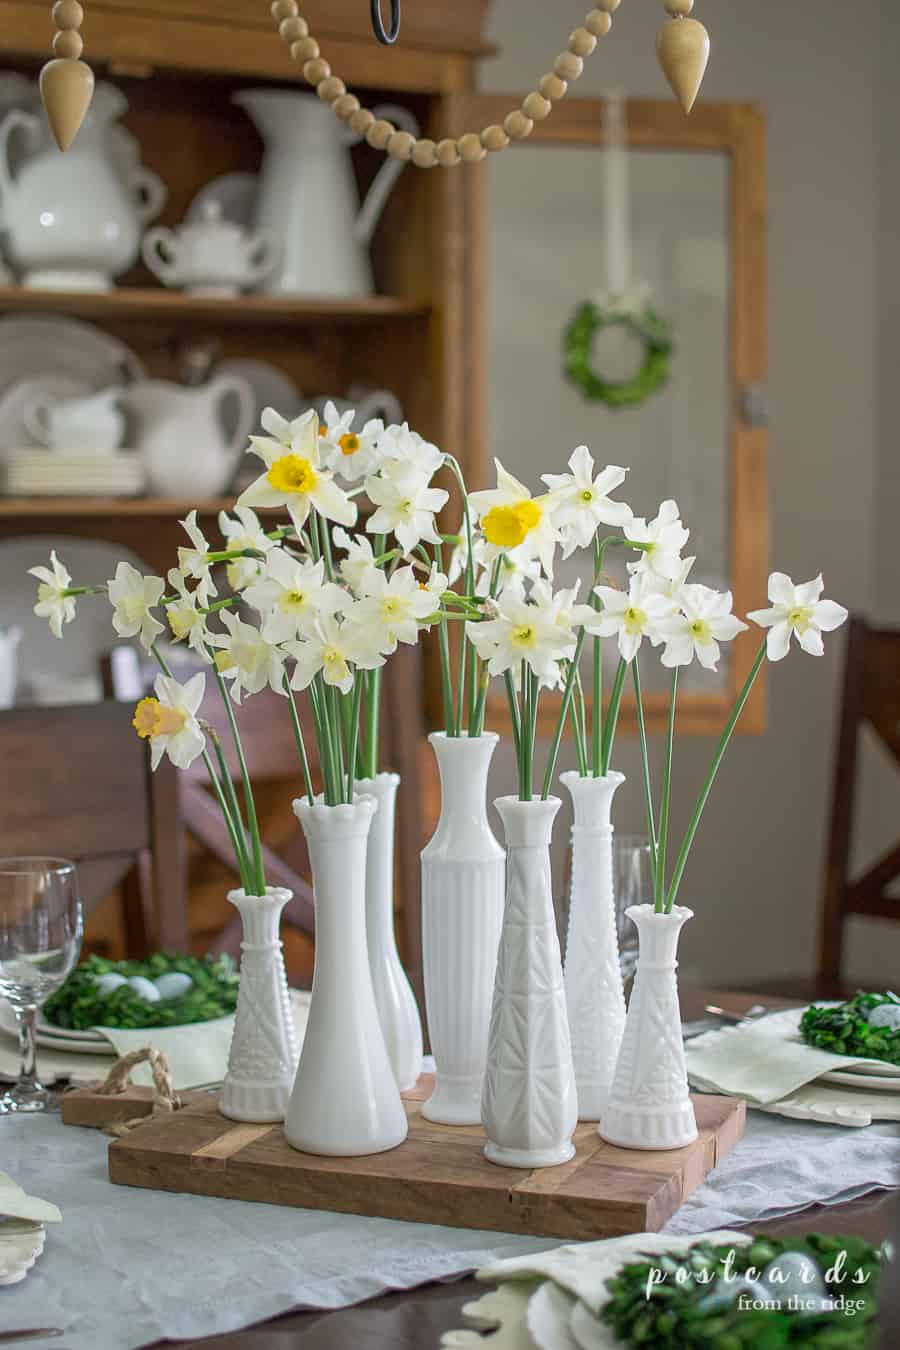 milk glass vases with daffodils